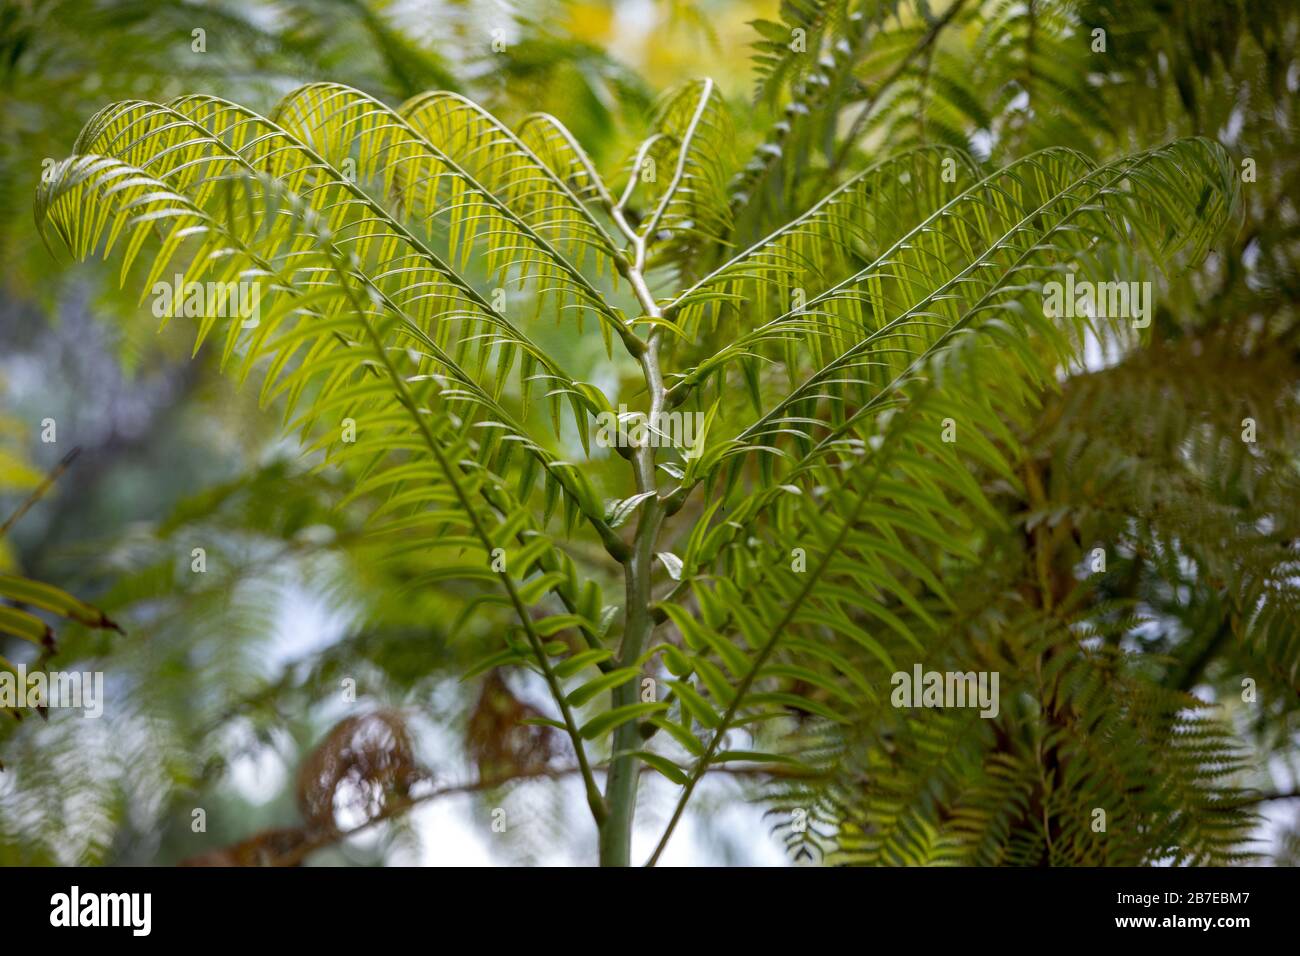 The giant tree fern of New Zealand. The fern symbolizes new life, growth, strength and peace and is used as a symbol of New Zealand flora and tourism. Stock Photo